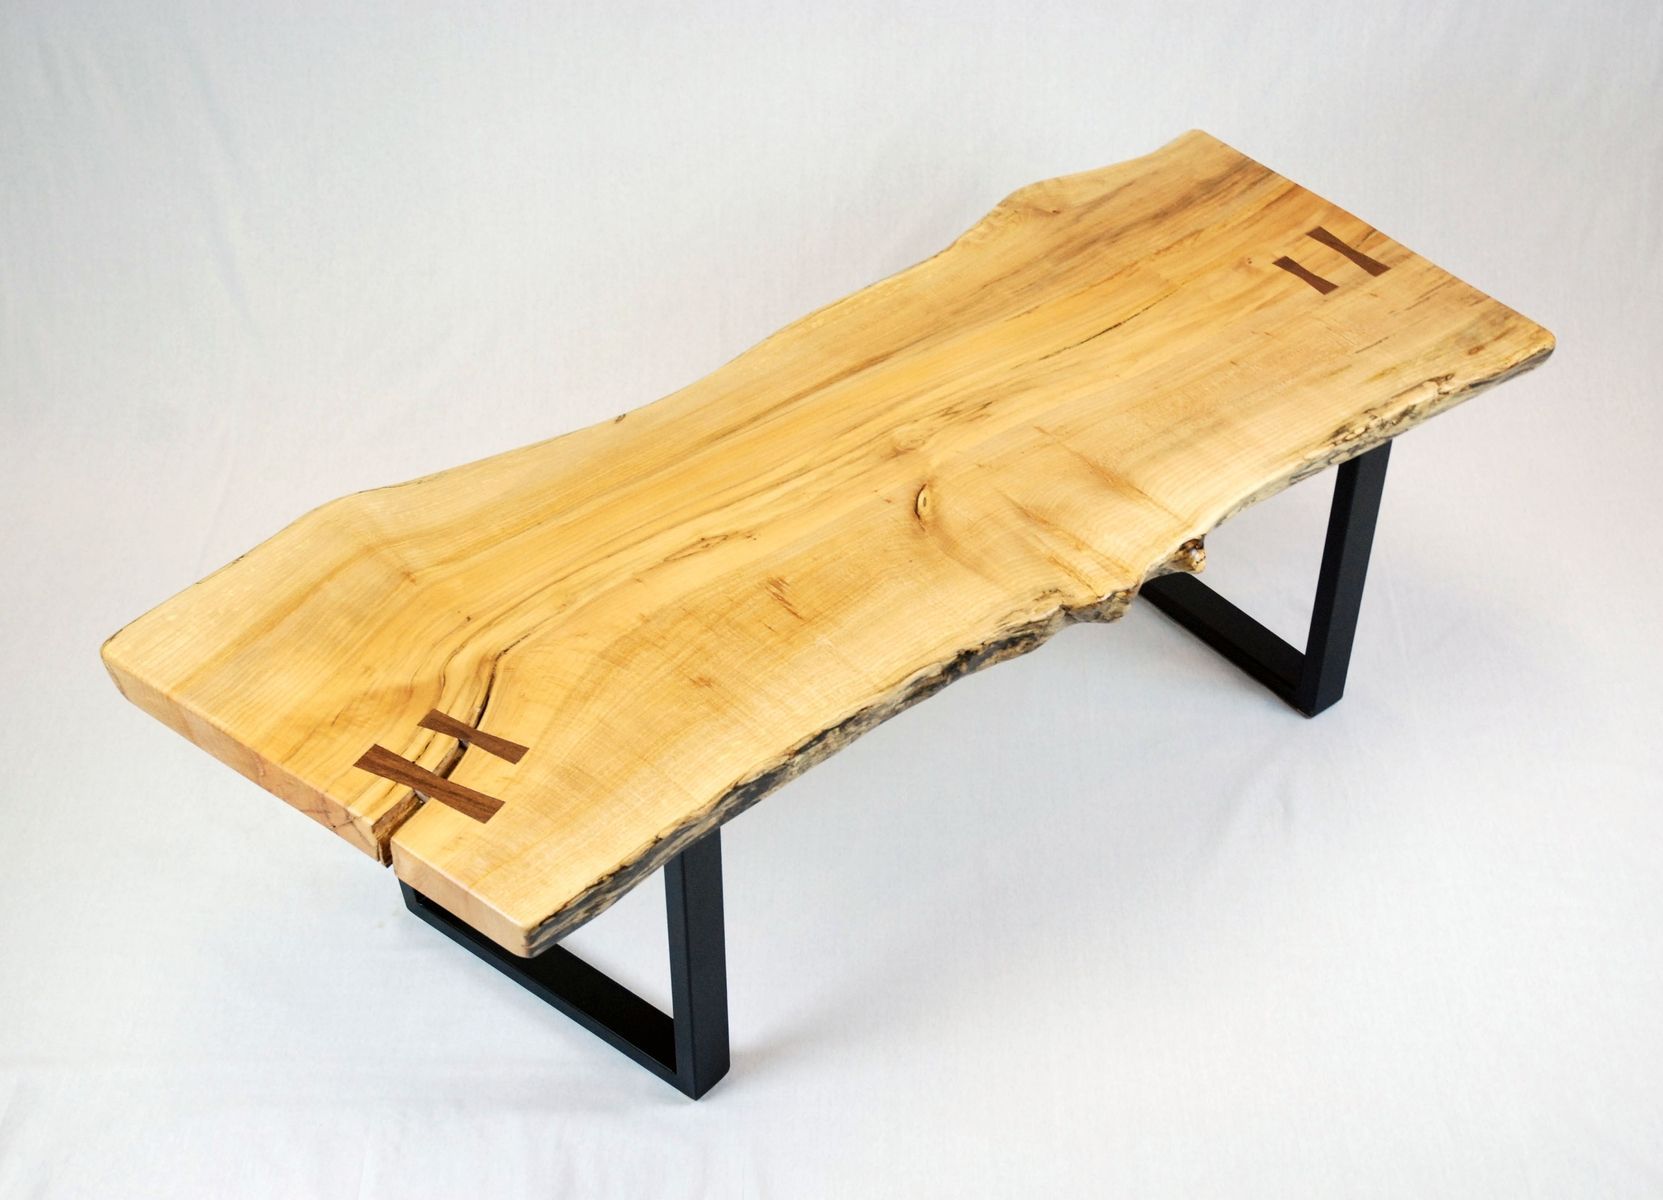 Hand Made Reclaimed Maple Slab Coffee Table With Black With Regard To Yellow And Black Coffee Tables (View 9 of 15)